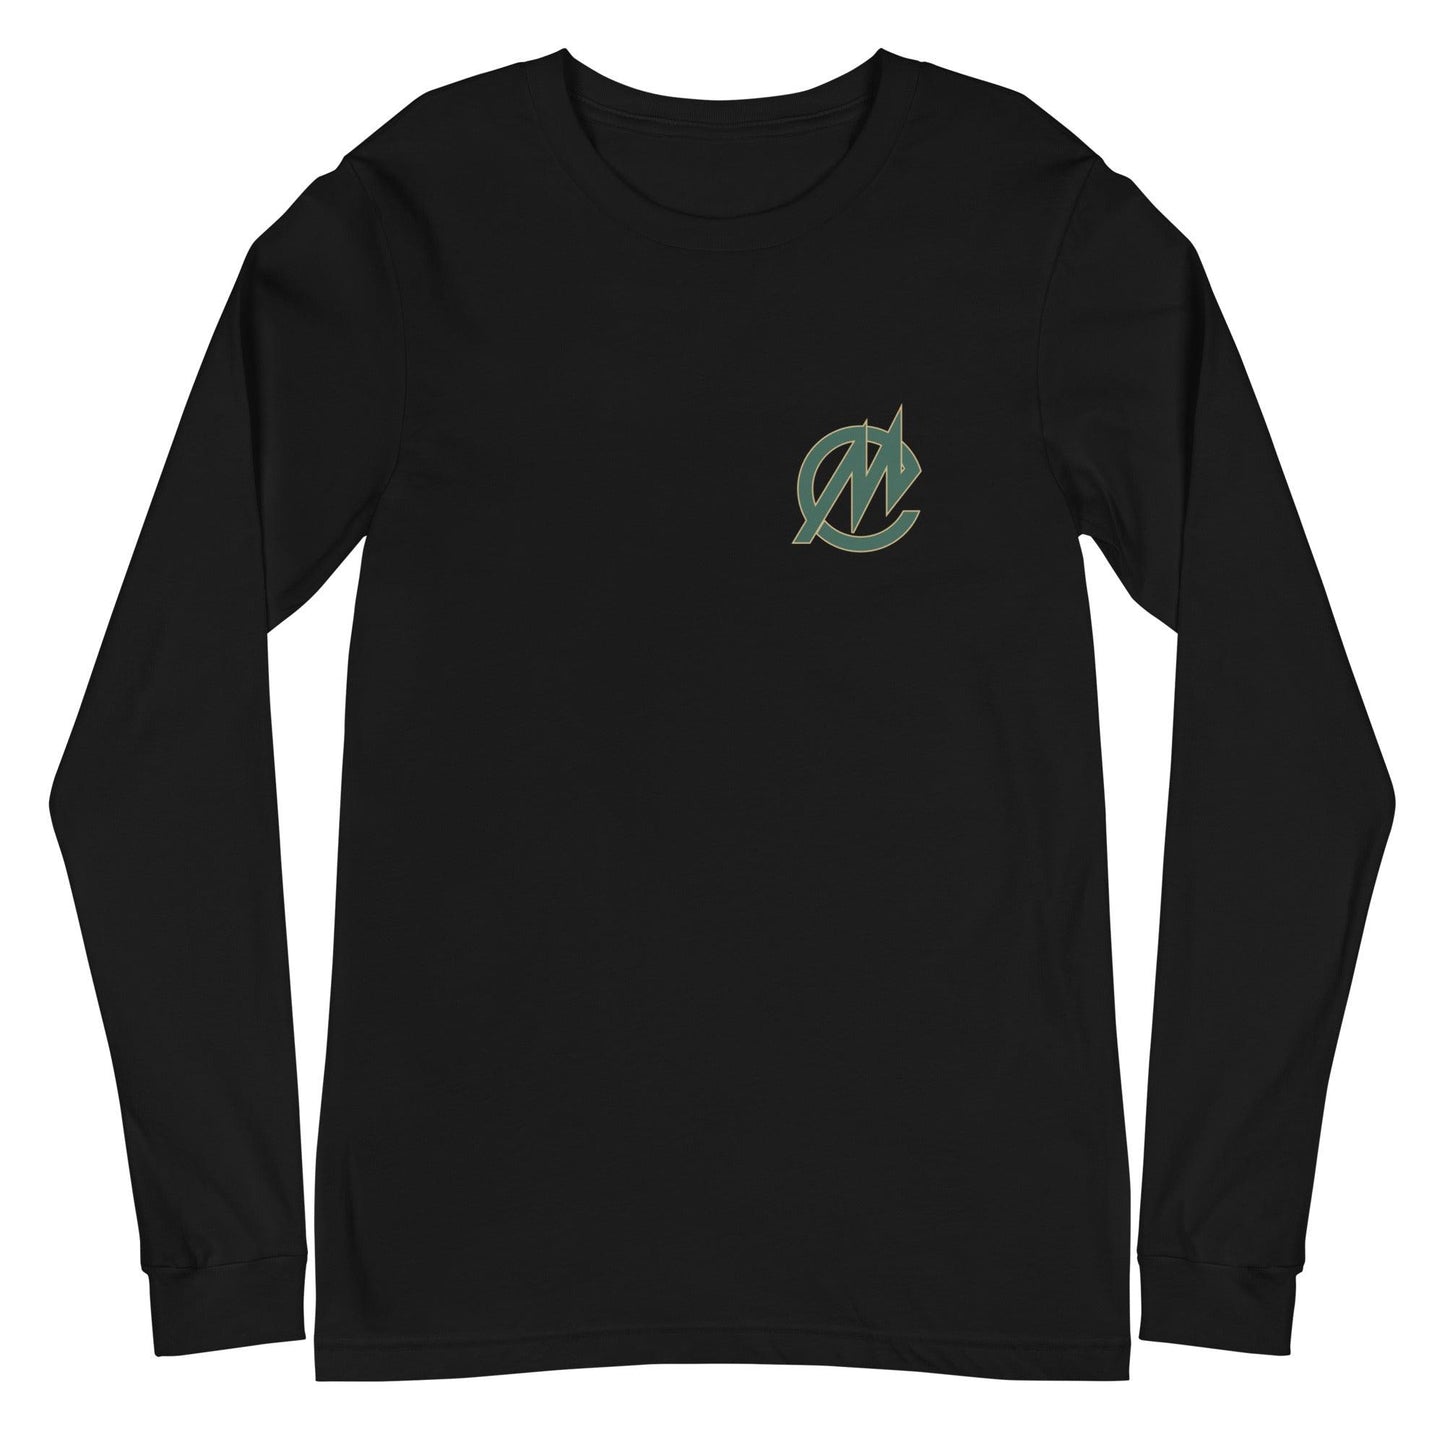 Chase Monroe "Essential" Long Sleeve Tee - Fan Arch